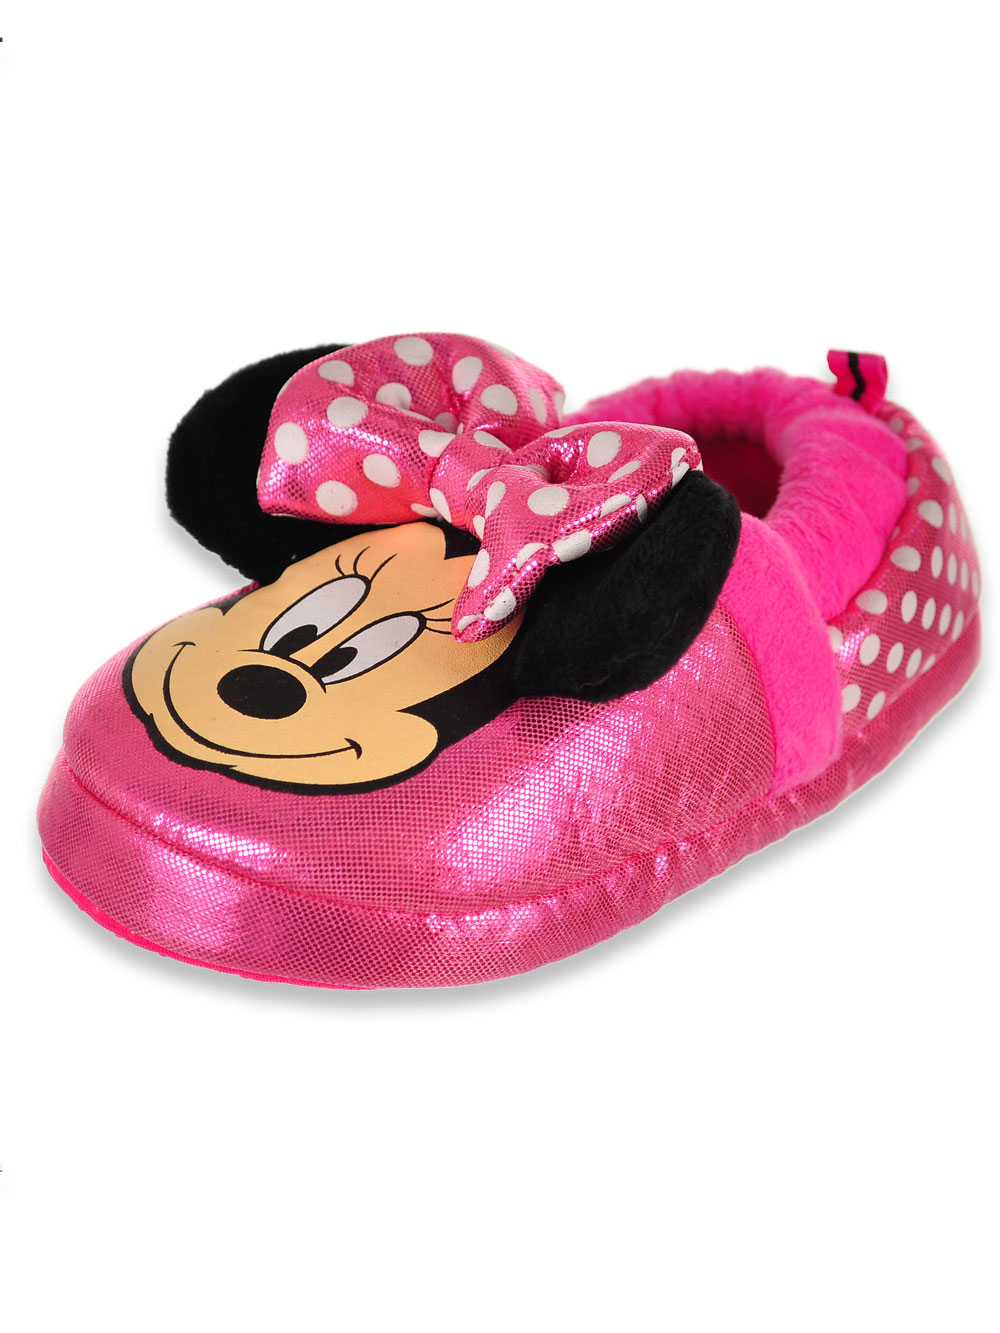 minnie mouse slippers